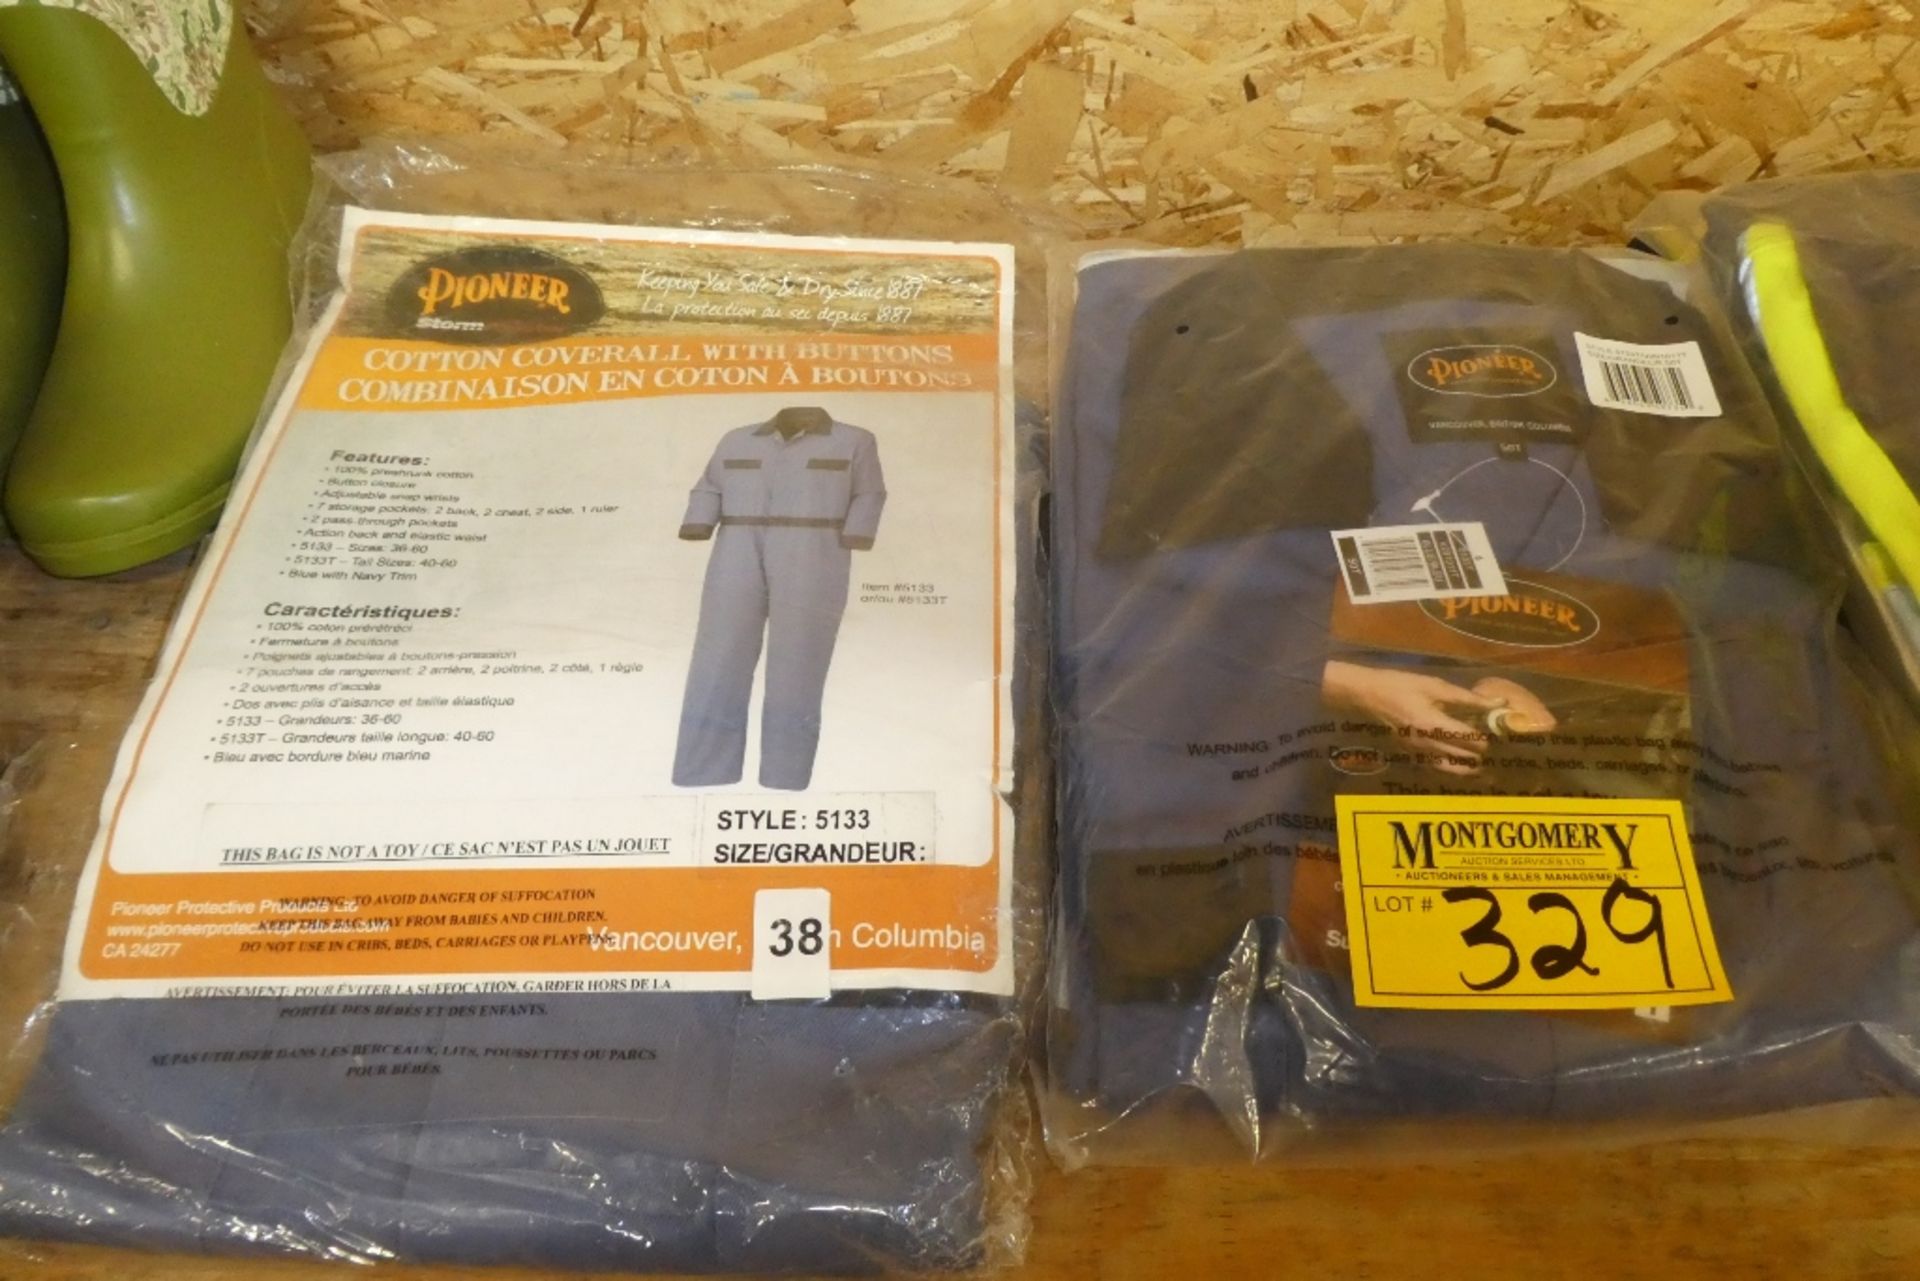 PIONEER COTTON COVERALL W/CONCEALED BRASS BUTTONS, SIZE 50T, PIONEER STORM MASTER COTTONCOVERALL W/